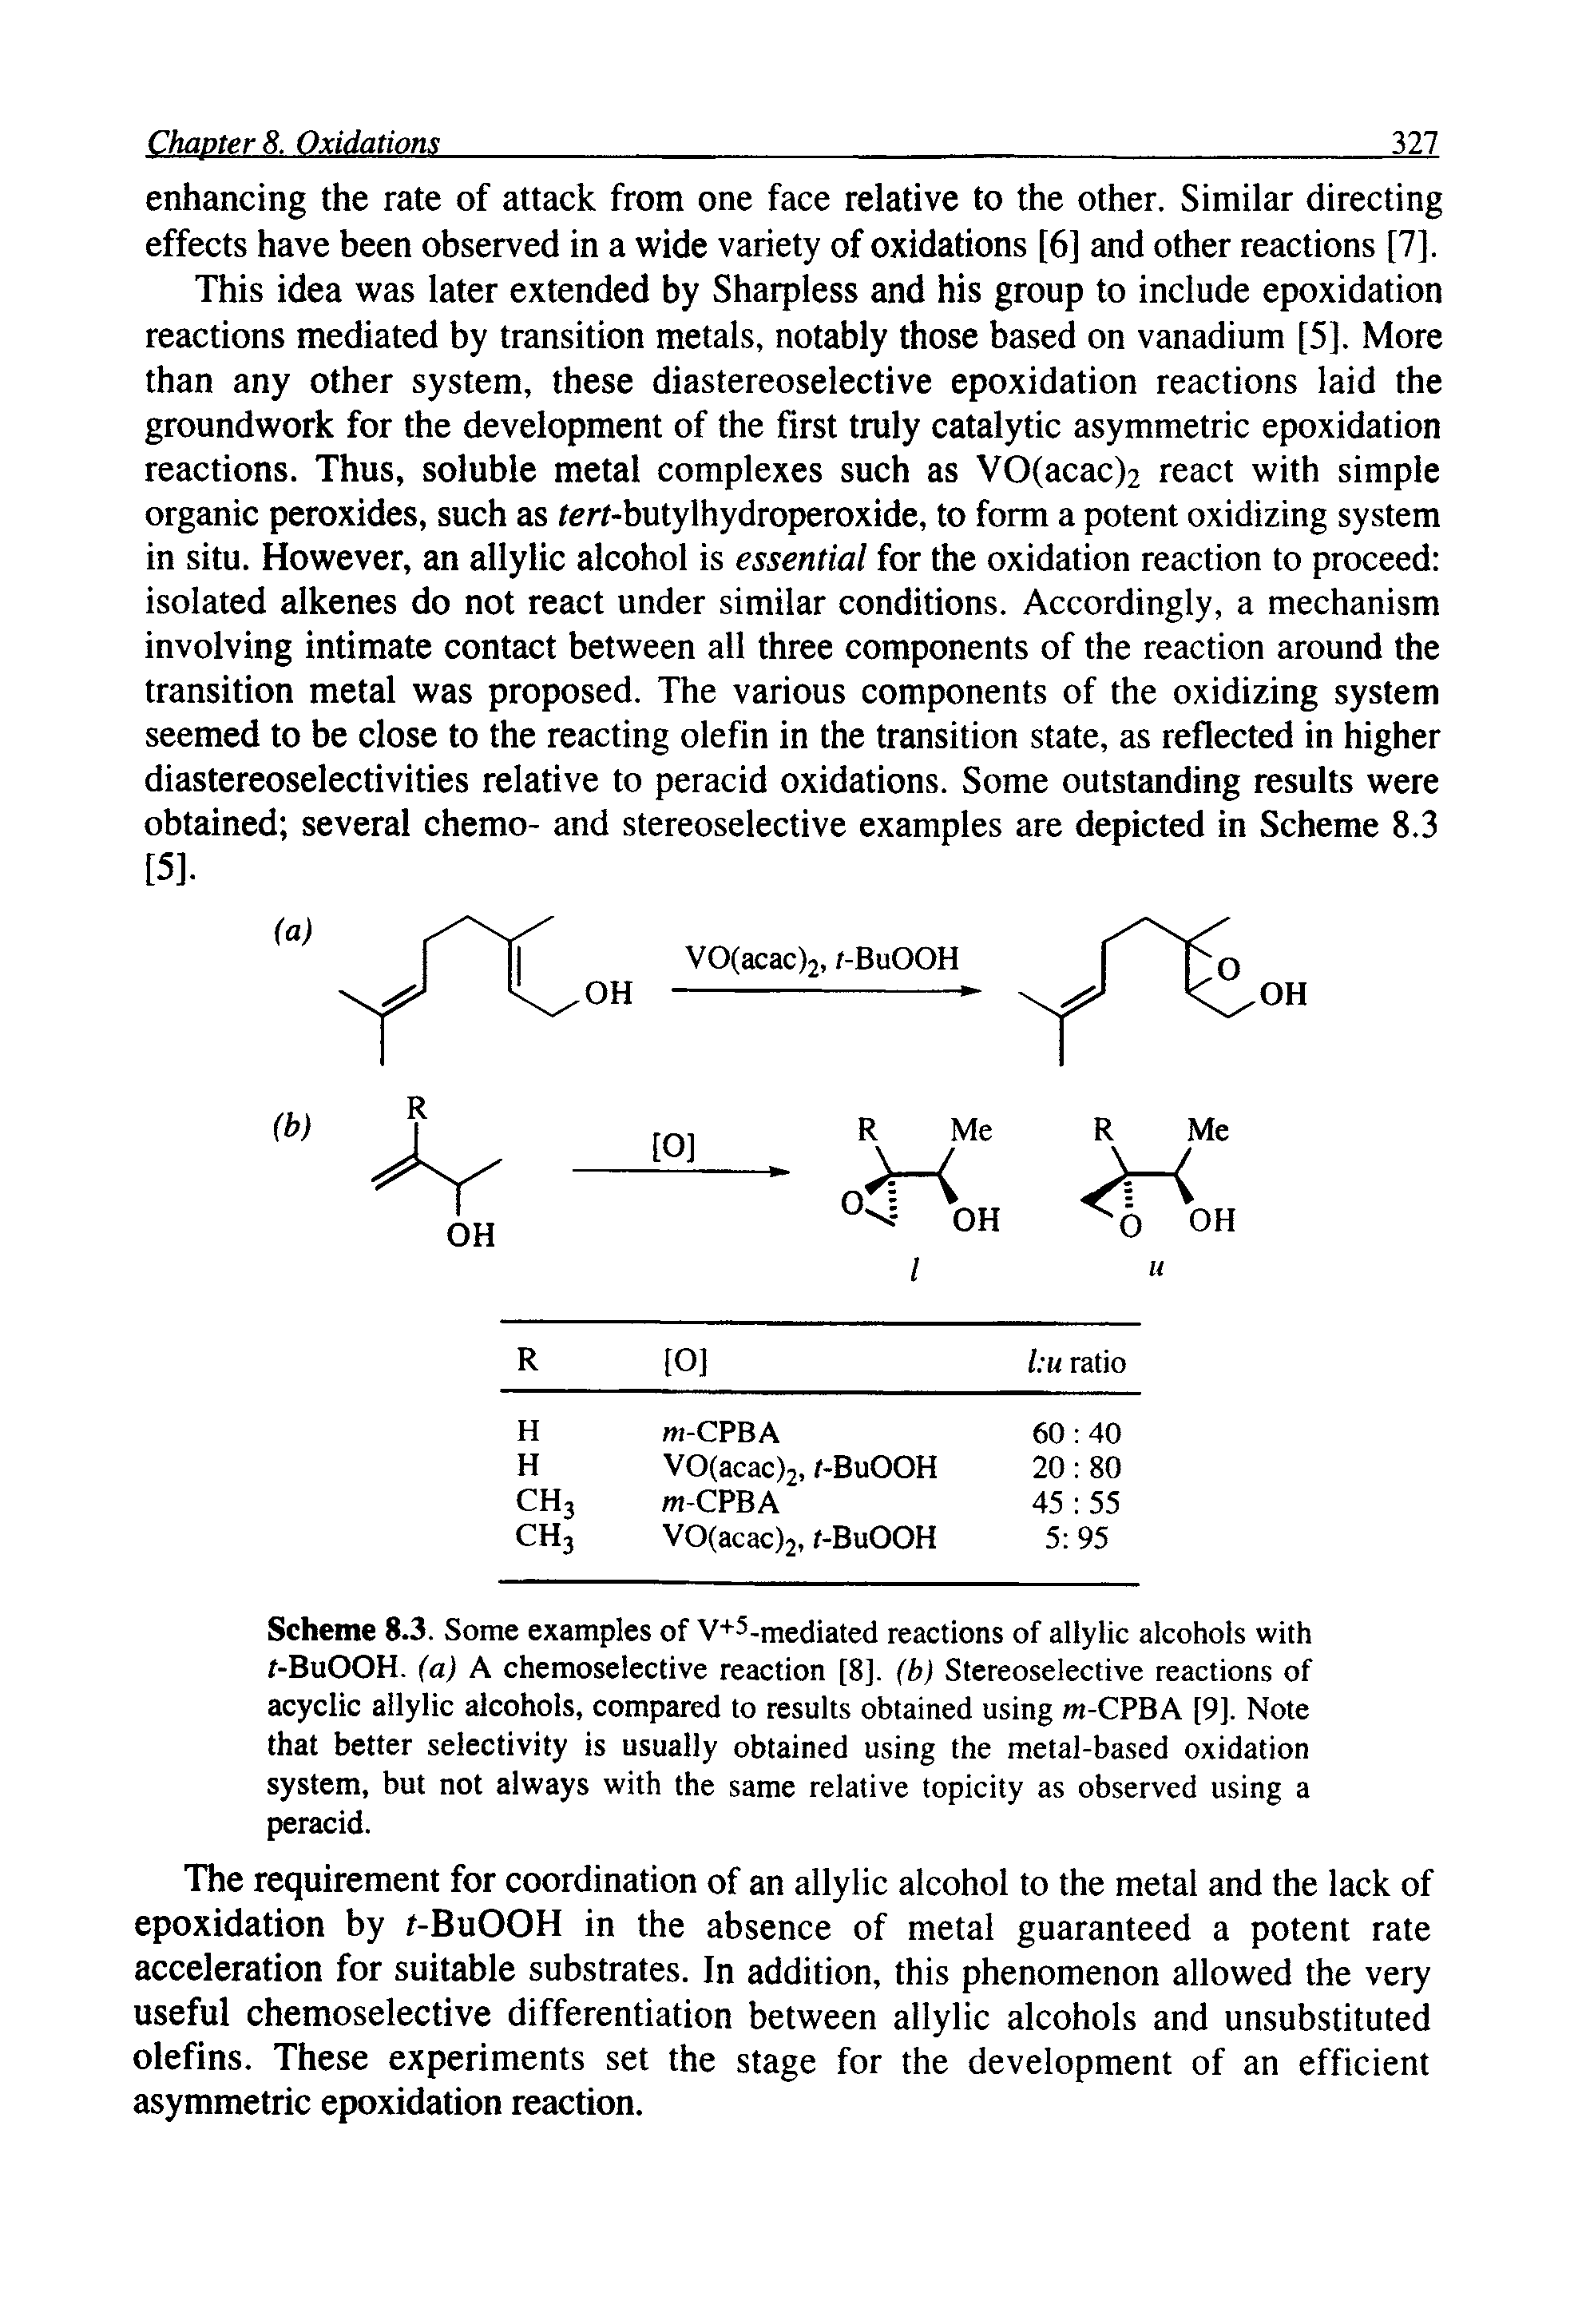 Scheme 8.3. Some examples of V+5-mediated reactions of allylic alcohols with r-BuOOH. (a) A chemoselective reaction [8]. (b) Stereoselective reactions of acyclic allylic alcohols, compared to results obtained using m-CPBA [9]. Note that better selectivity is usually obtained using the metal-based oxidation system, but not always with the same relative topicity as observed using a peracid.